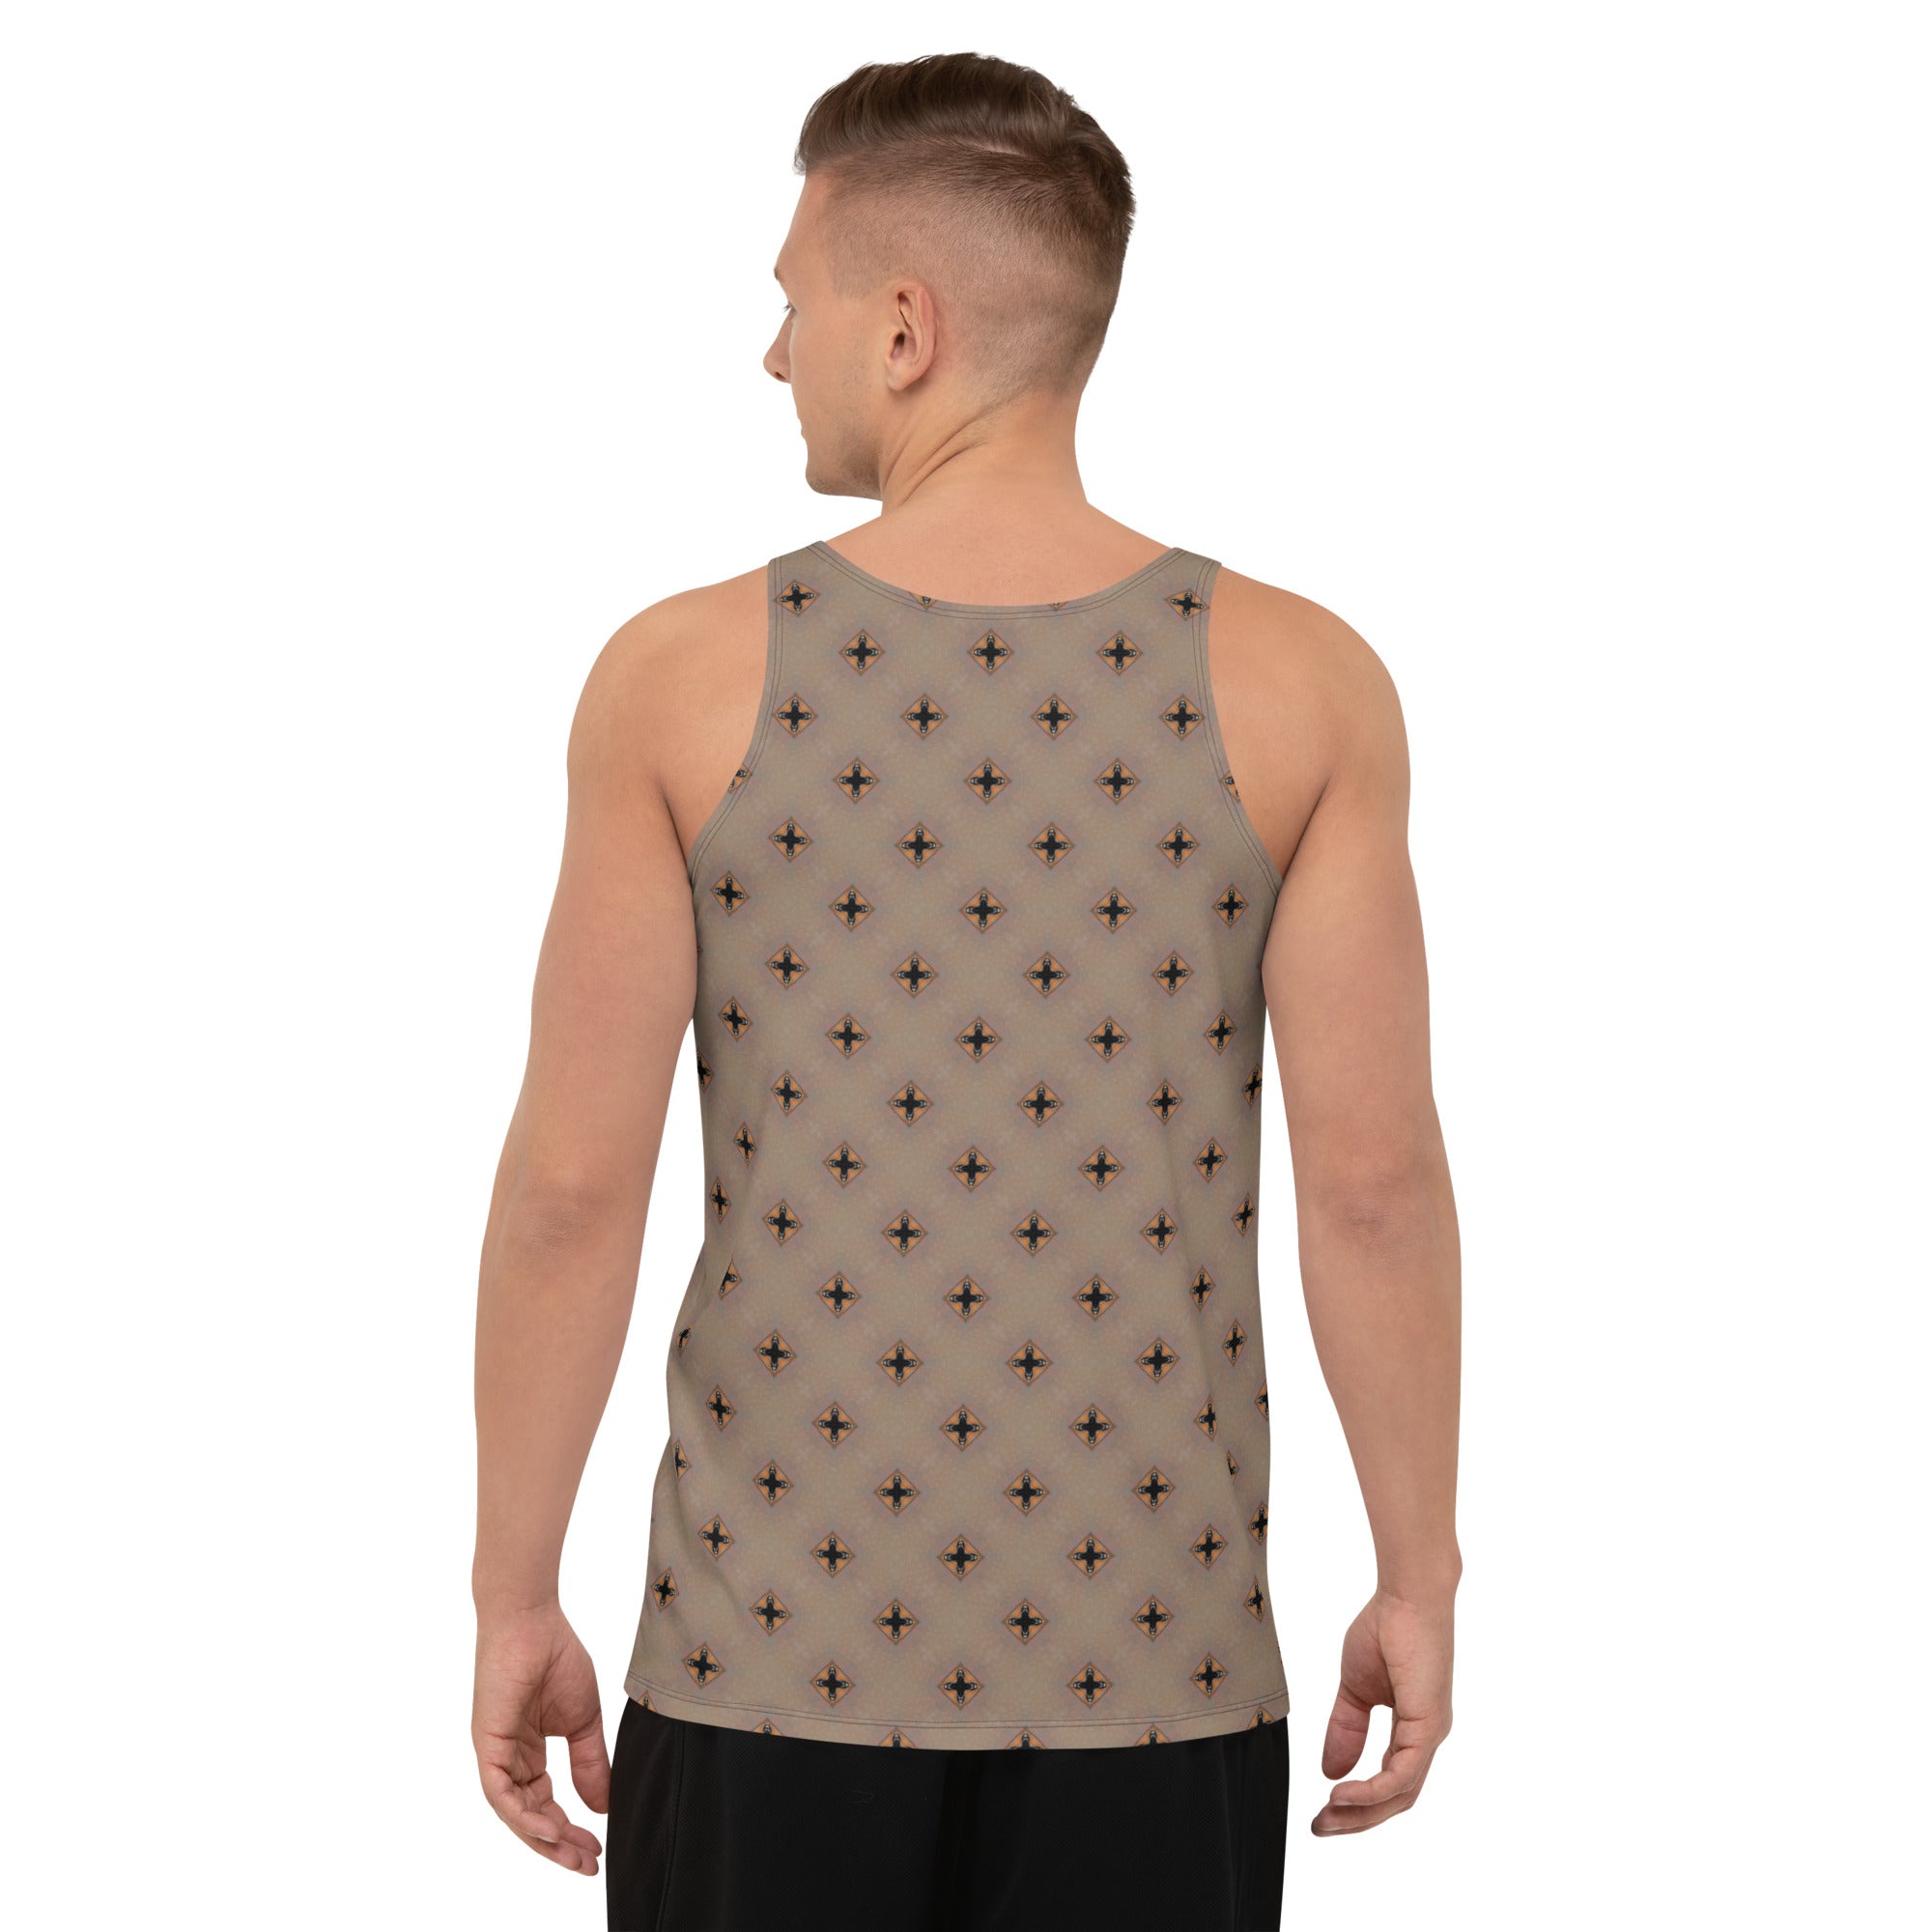 Comfortable and breathable men's tank top for gym wear.